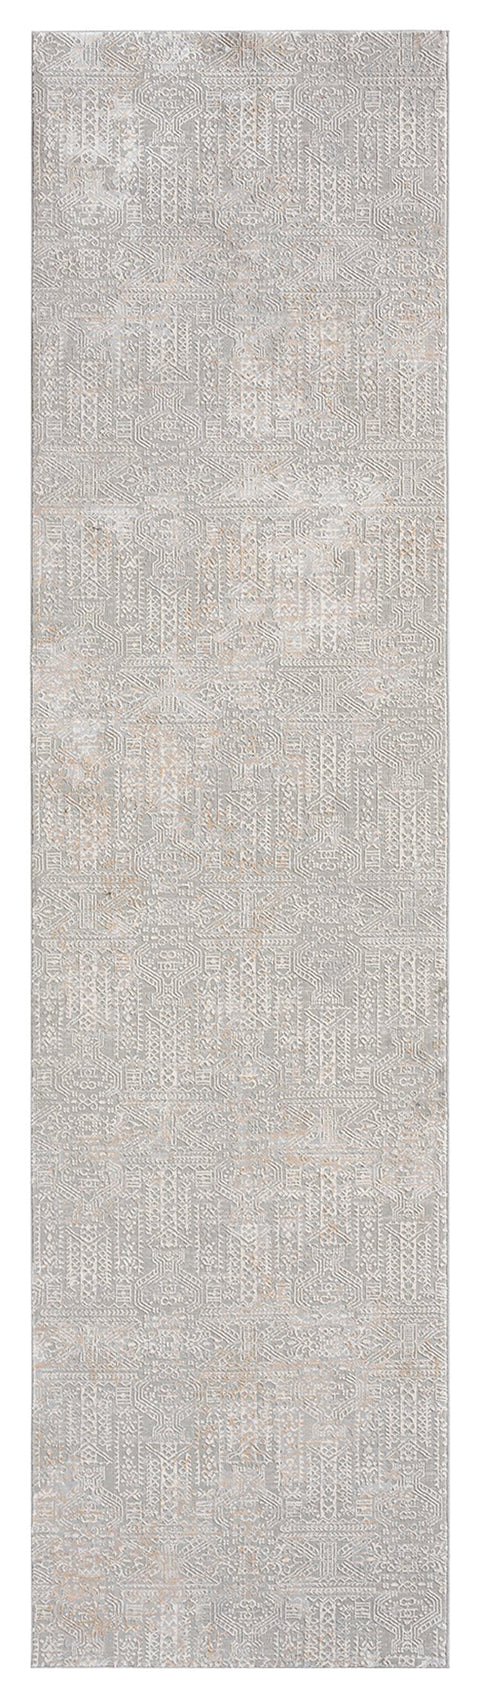 Satine Grey and Ivory Distressed Floral Tribal Runner Rug